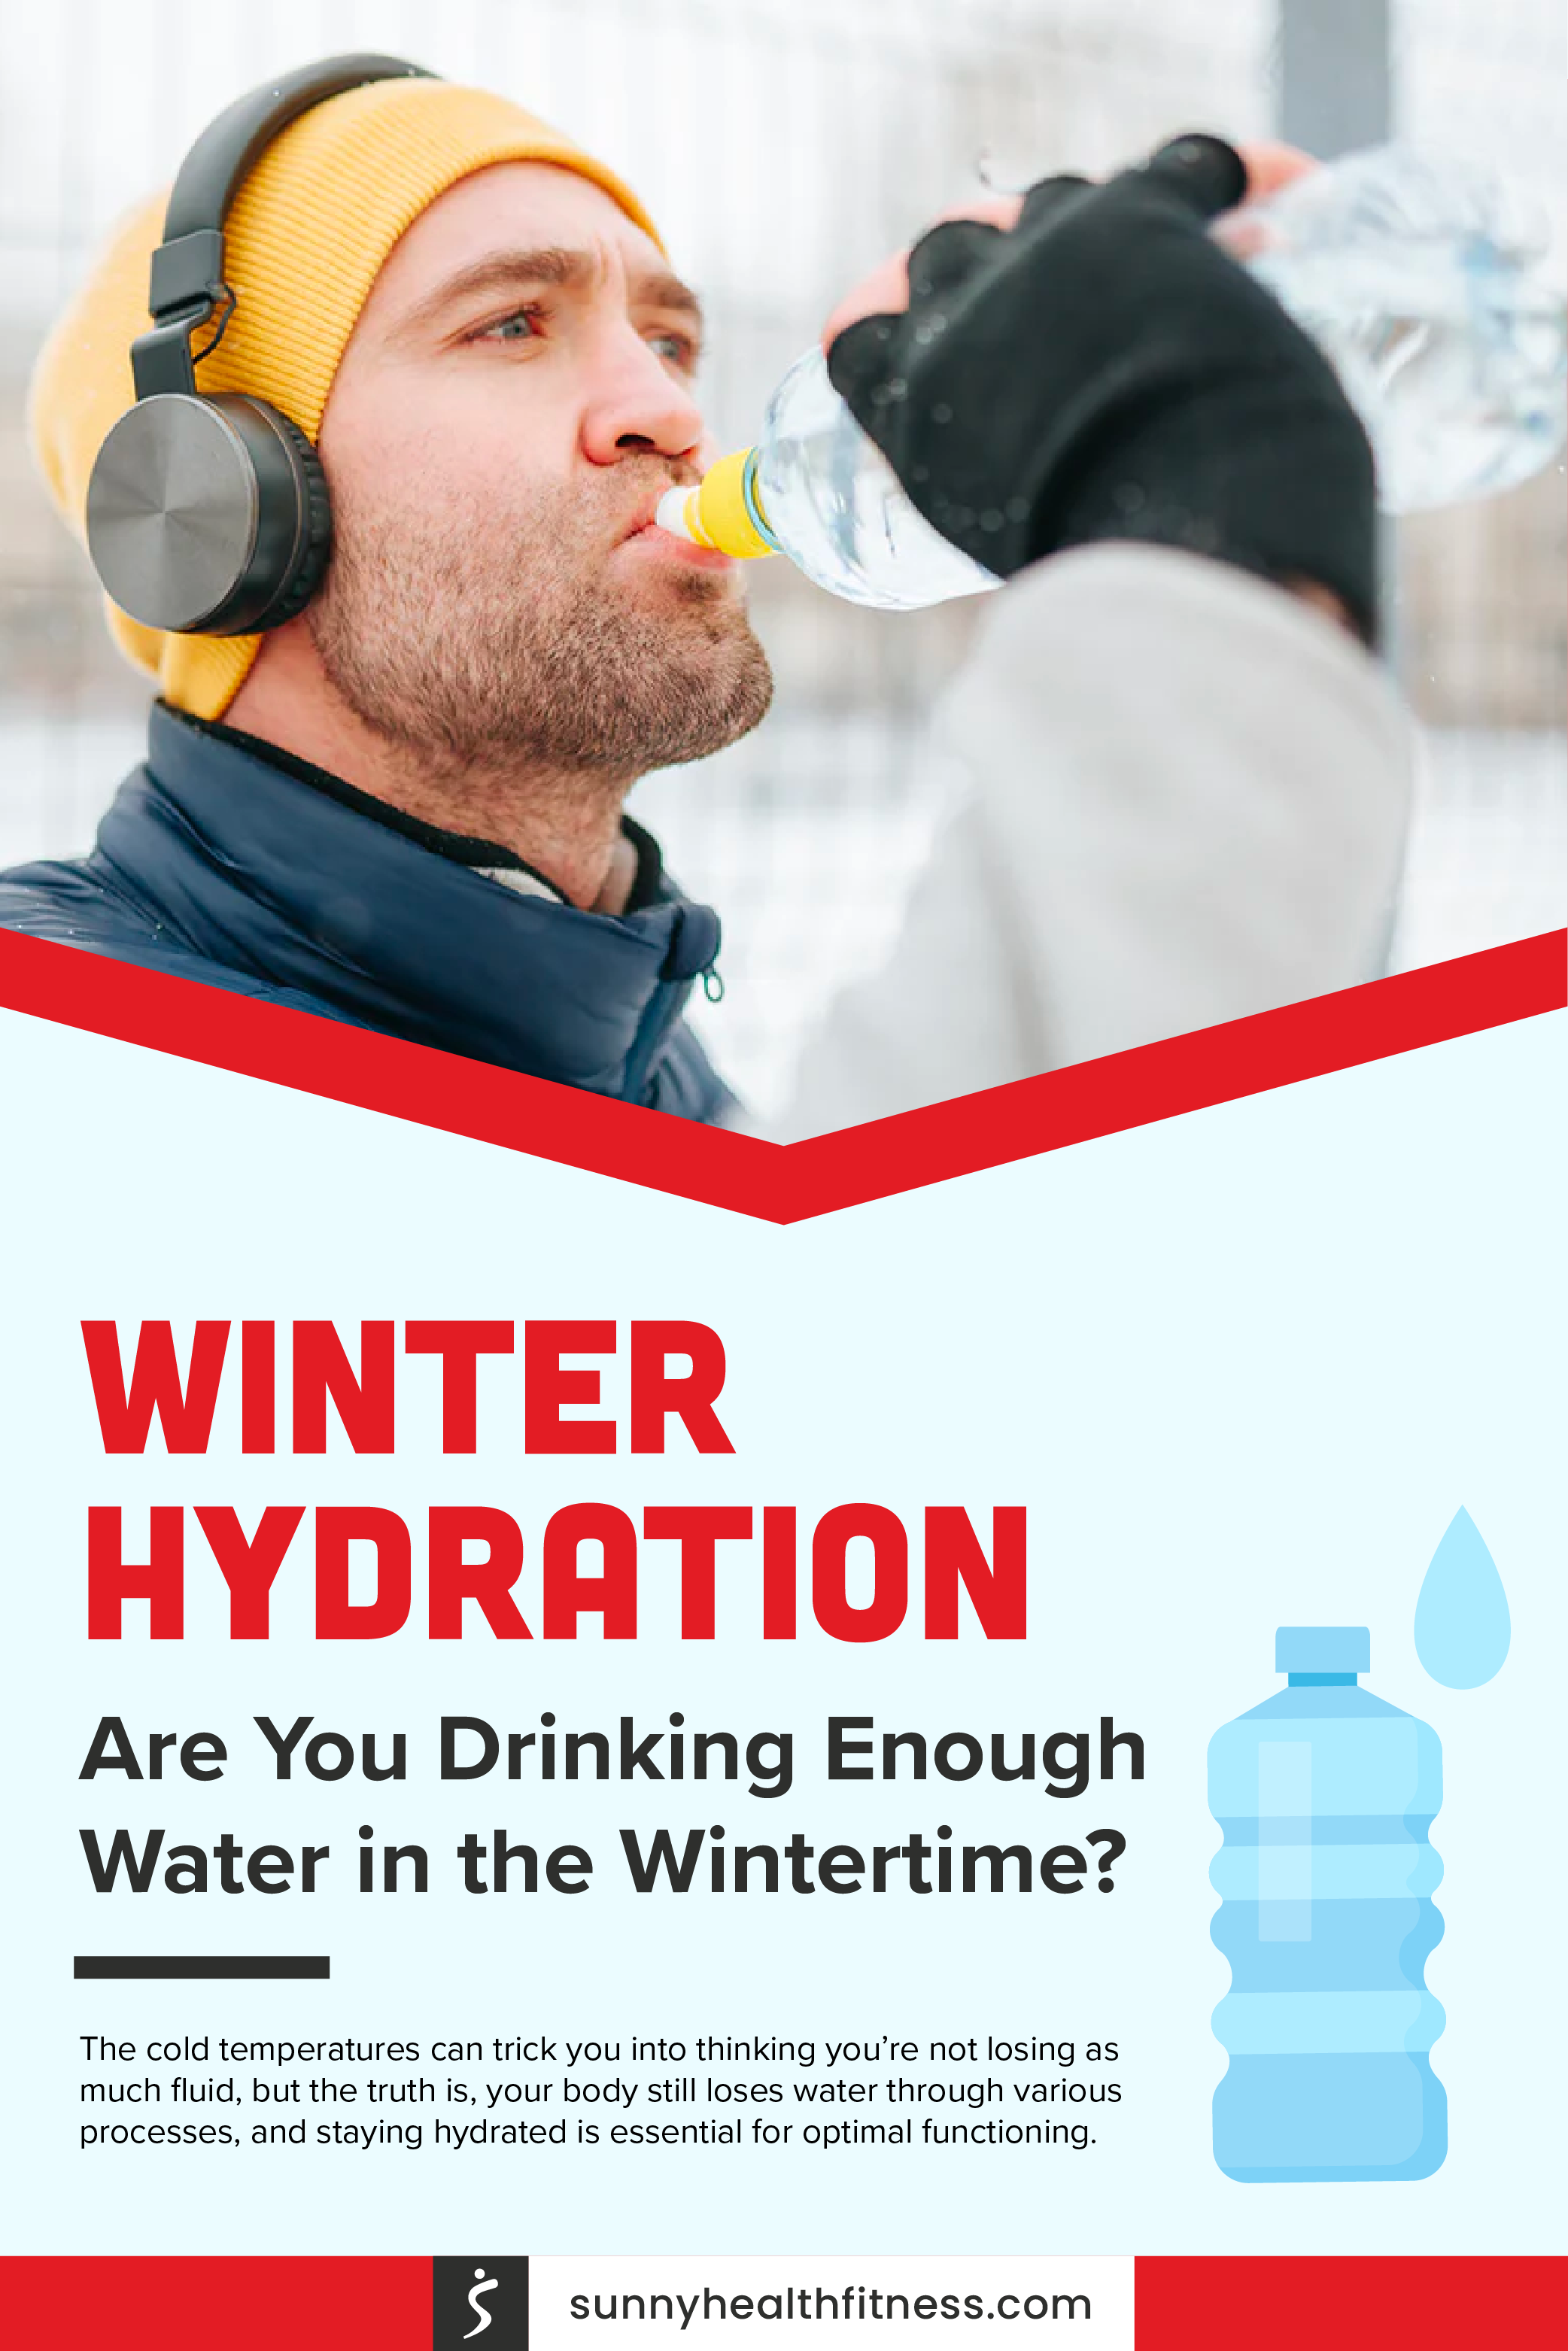 Winter Hydration Infographic